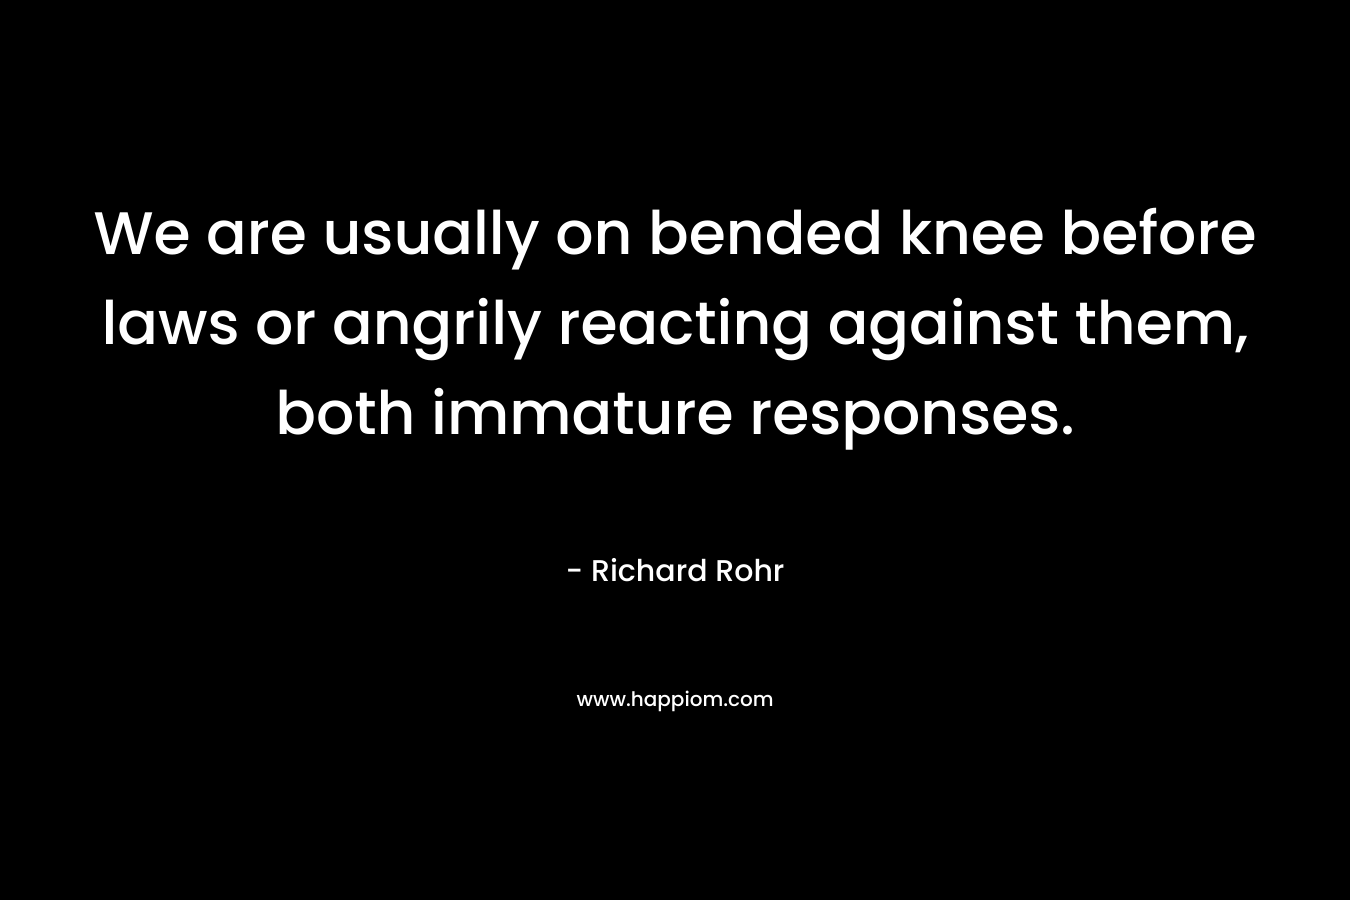 We are usually on bended knee before laws or angrily reacting against them, both immature responses. – Richard Rohr